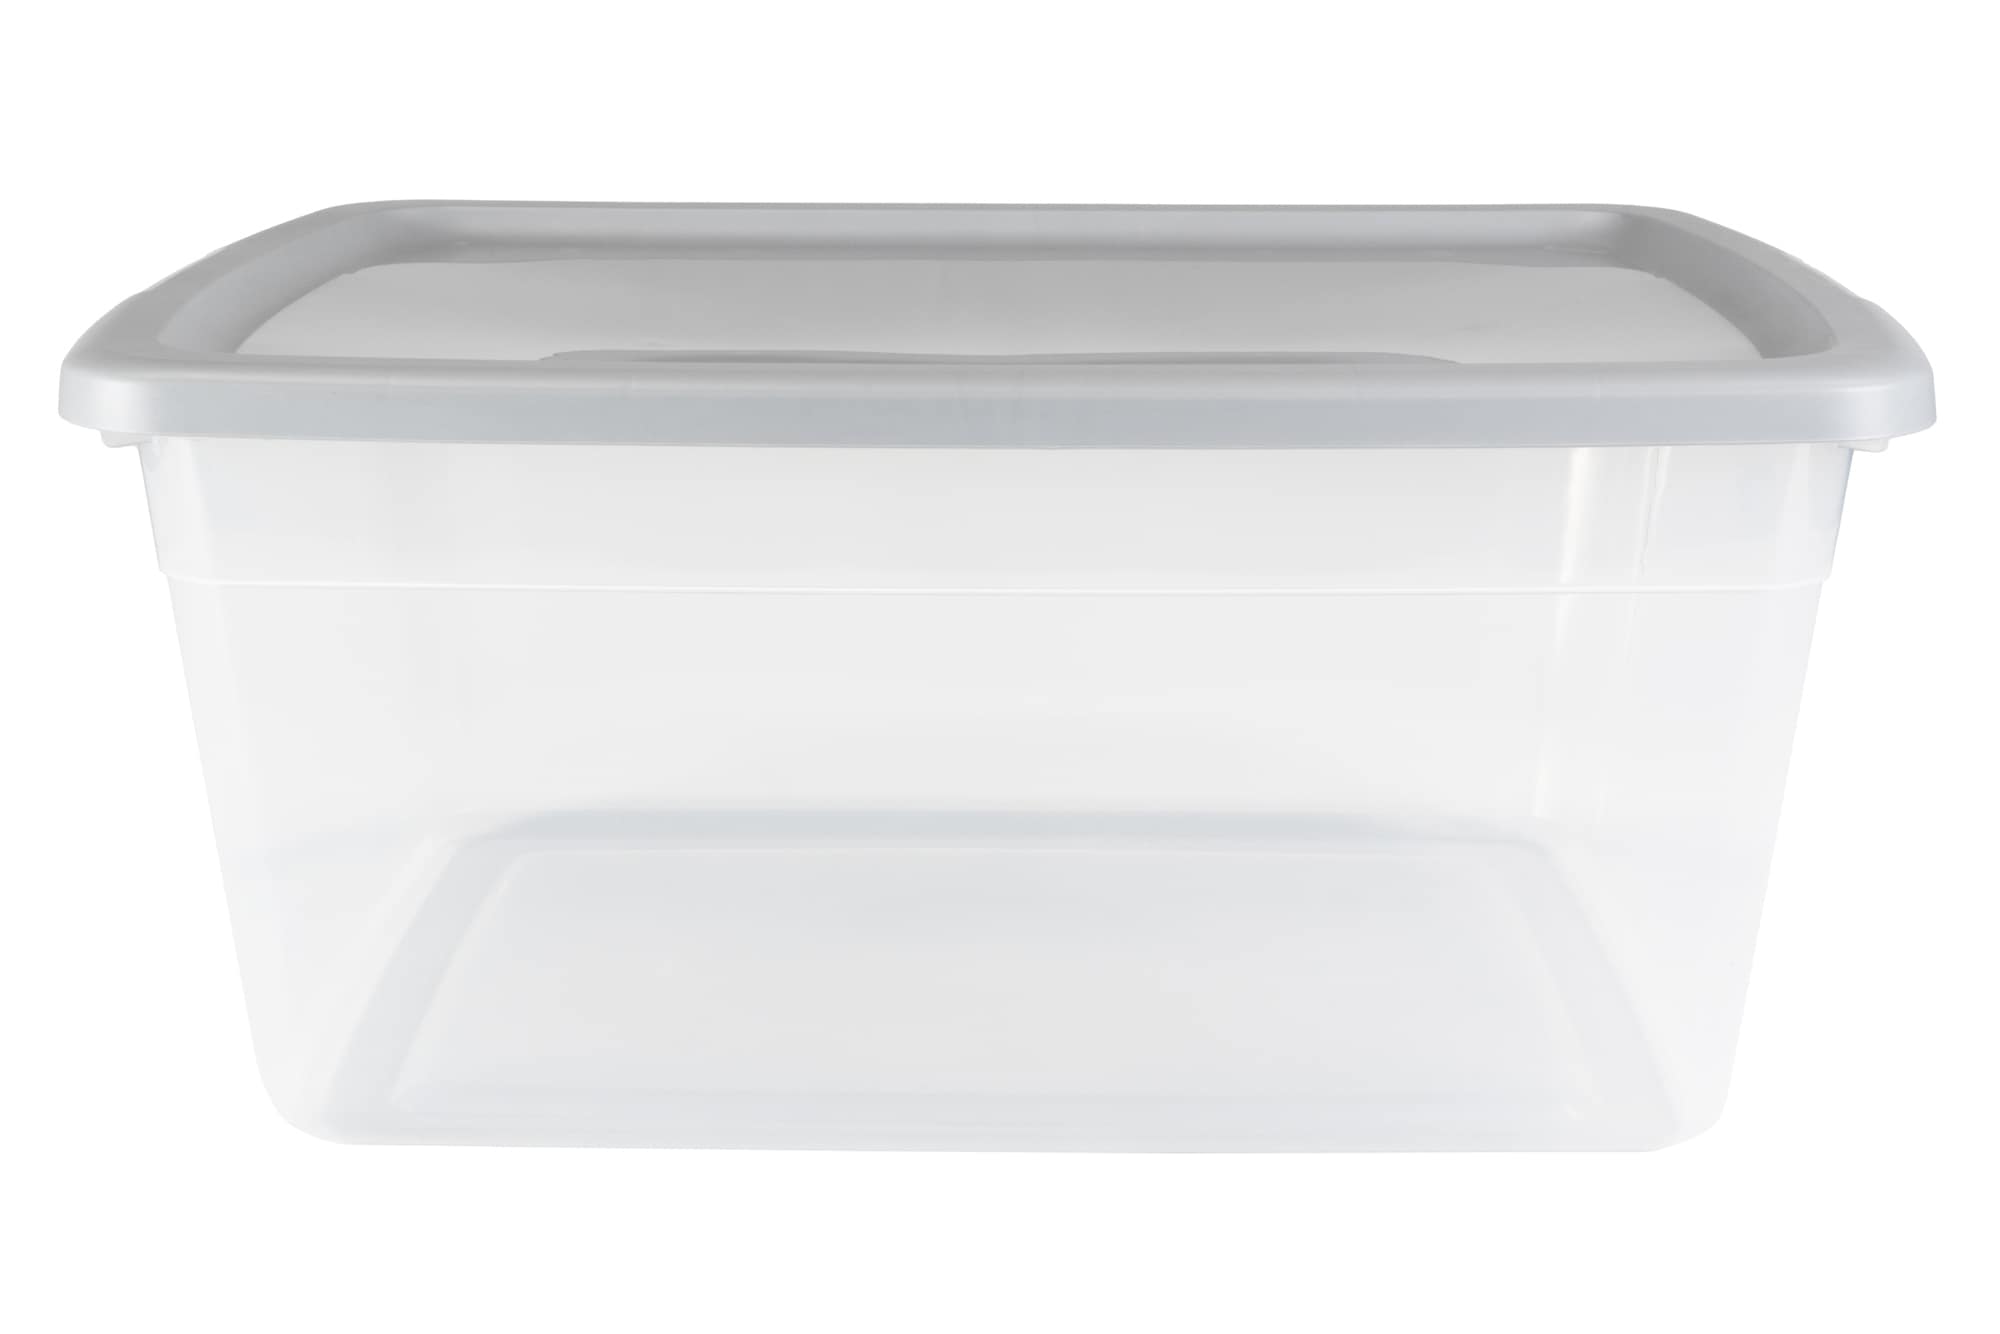 Acrylic Container With Lid : Target